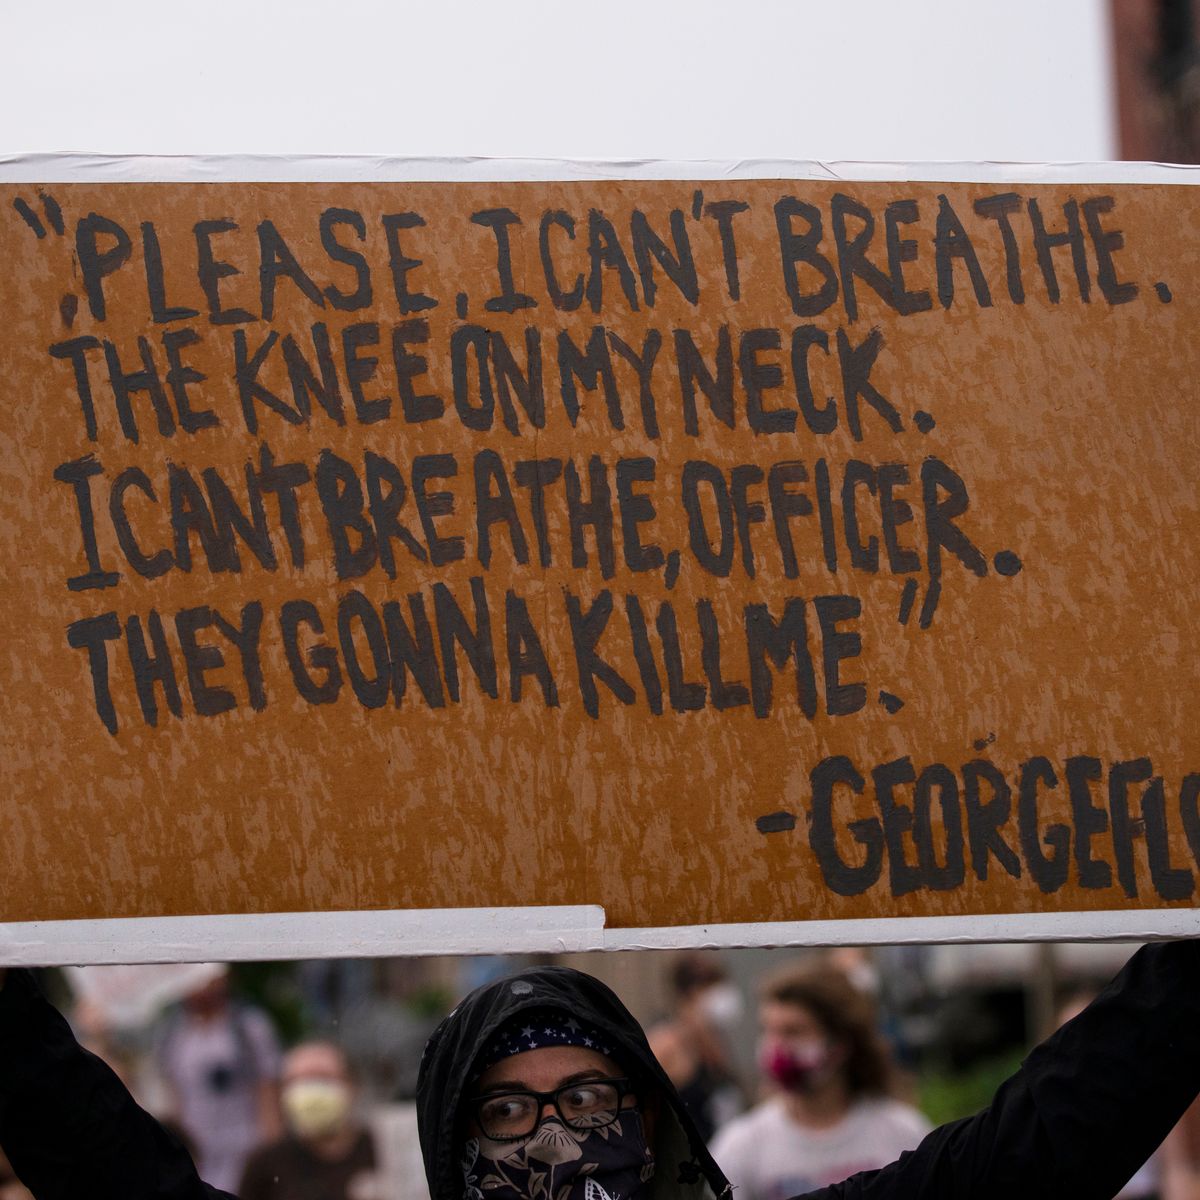 Hundreds Protest Police Death of George Floyd in Minneapolis